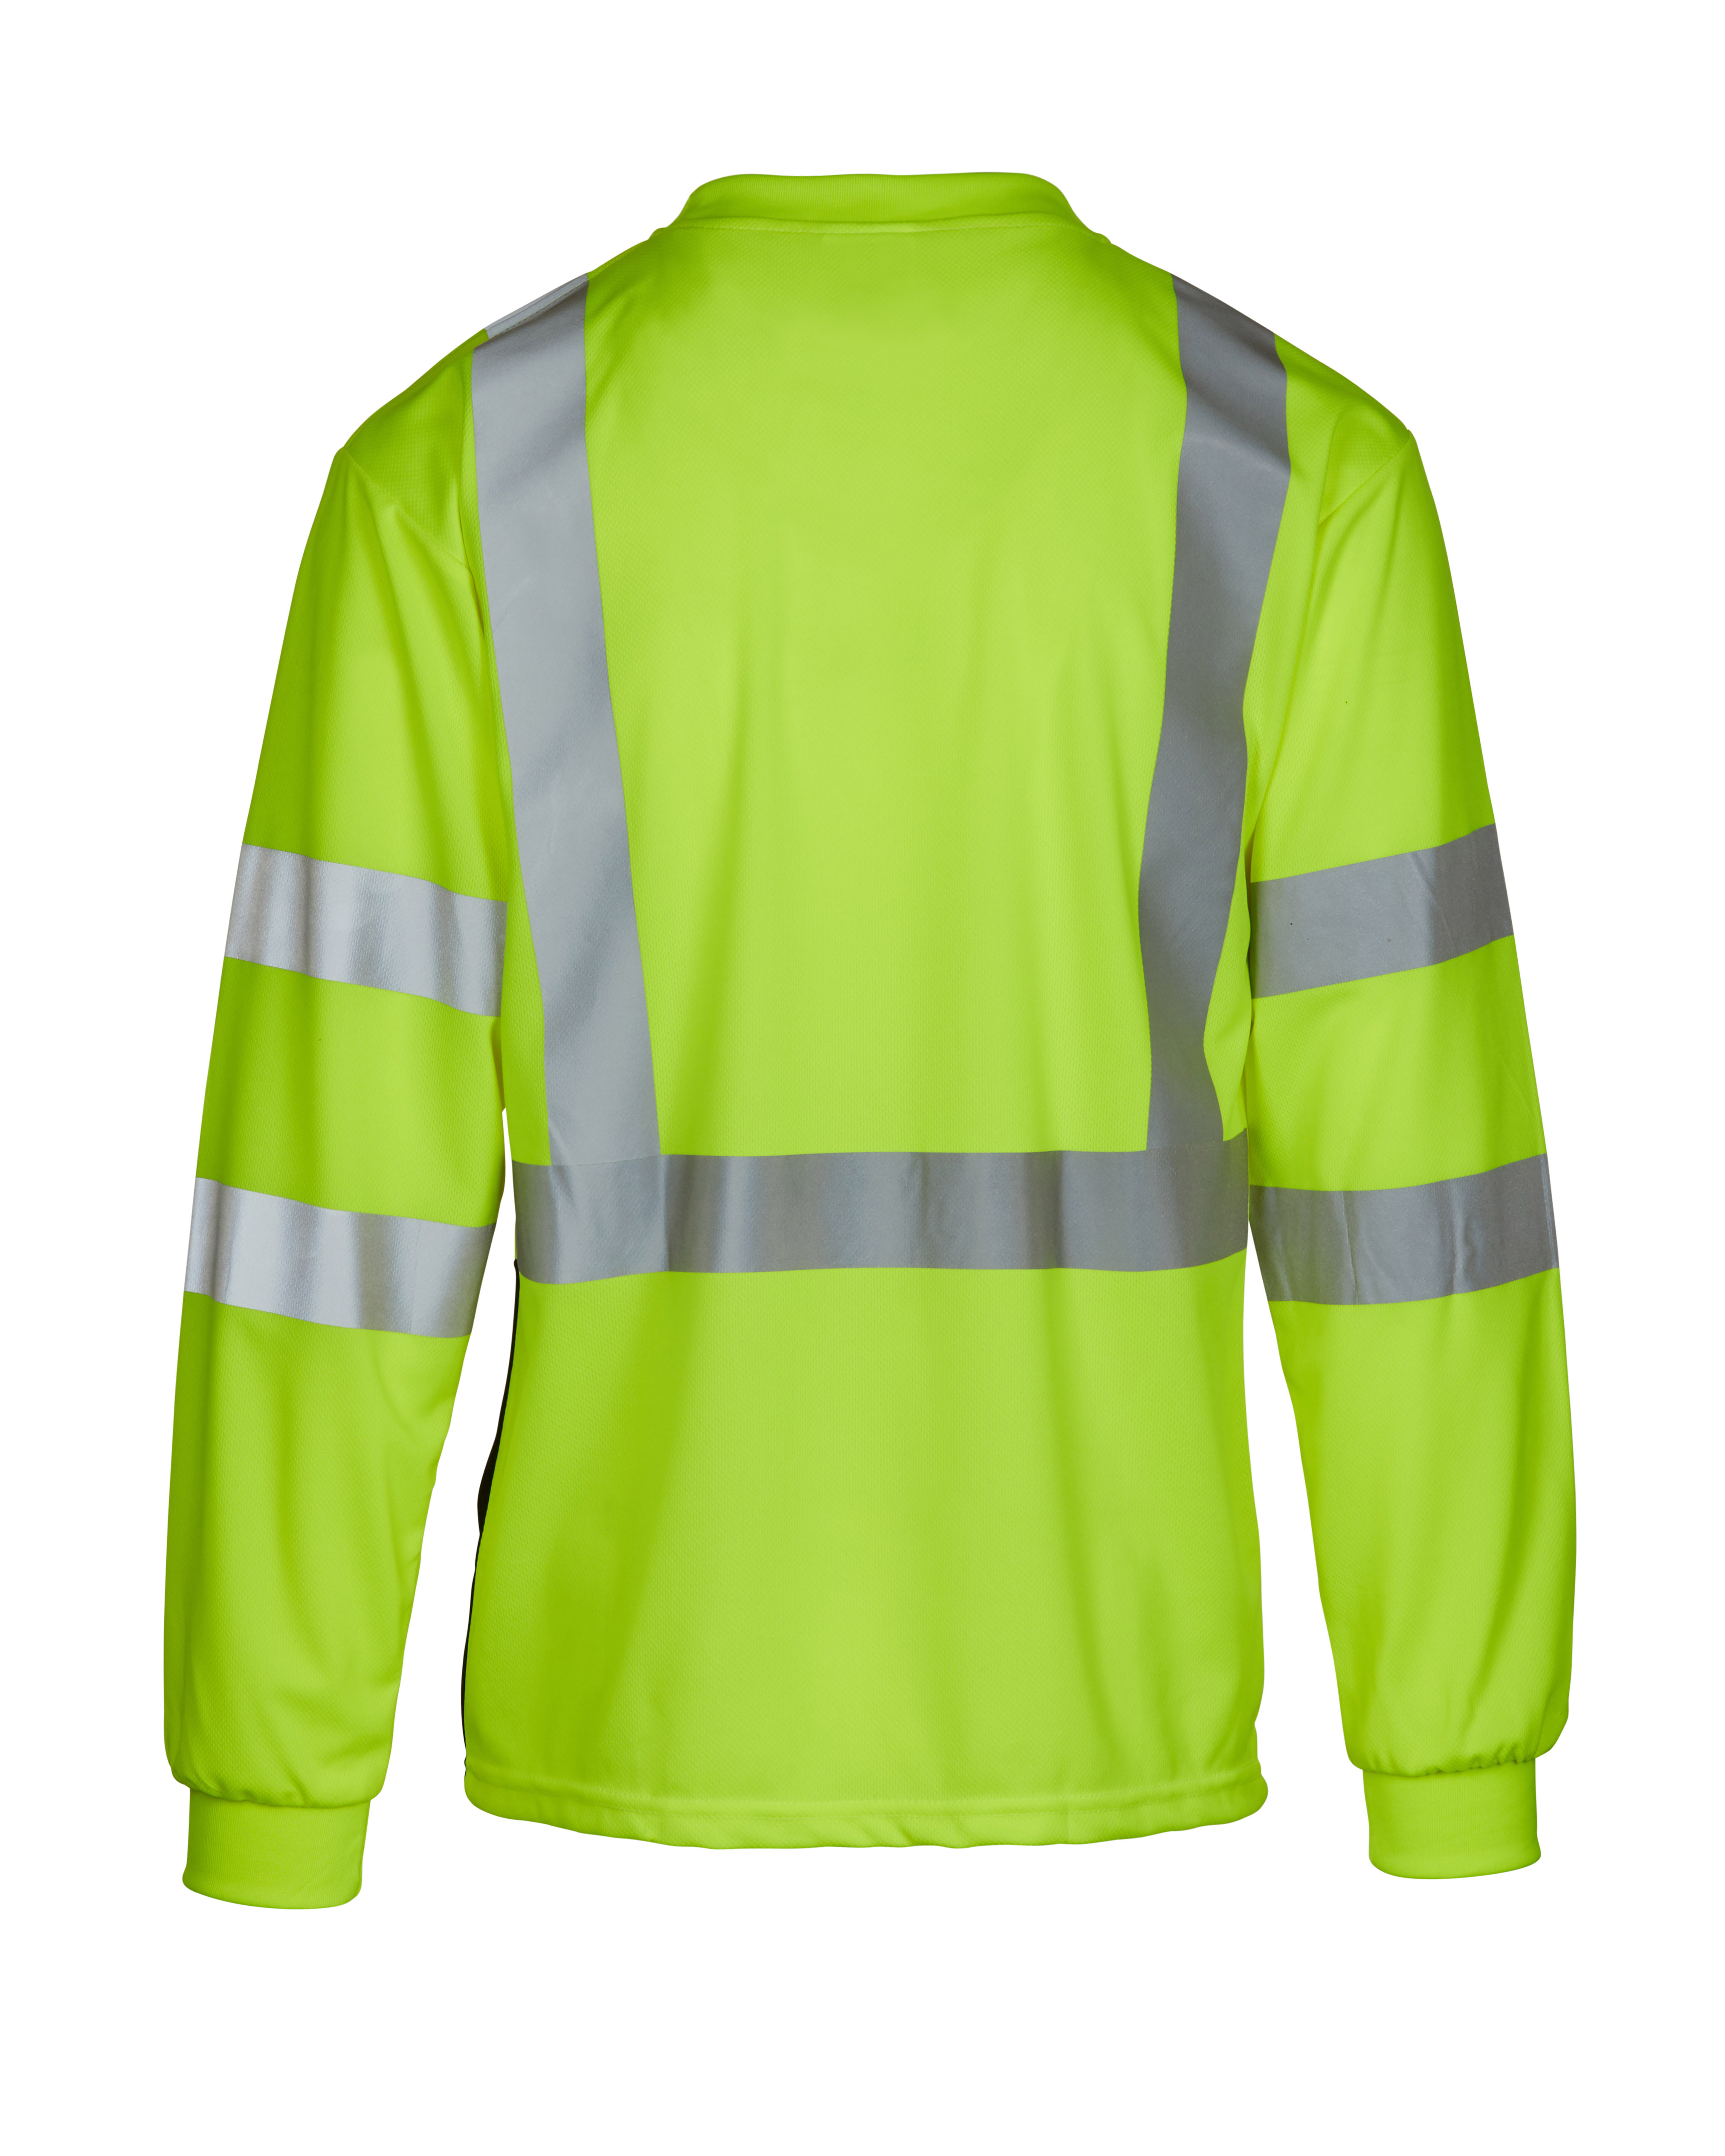 Picture of Max Apparel MAX455 Class 3 Long Sleeve T-shirt, Safety Green/Black Bottom